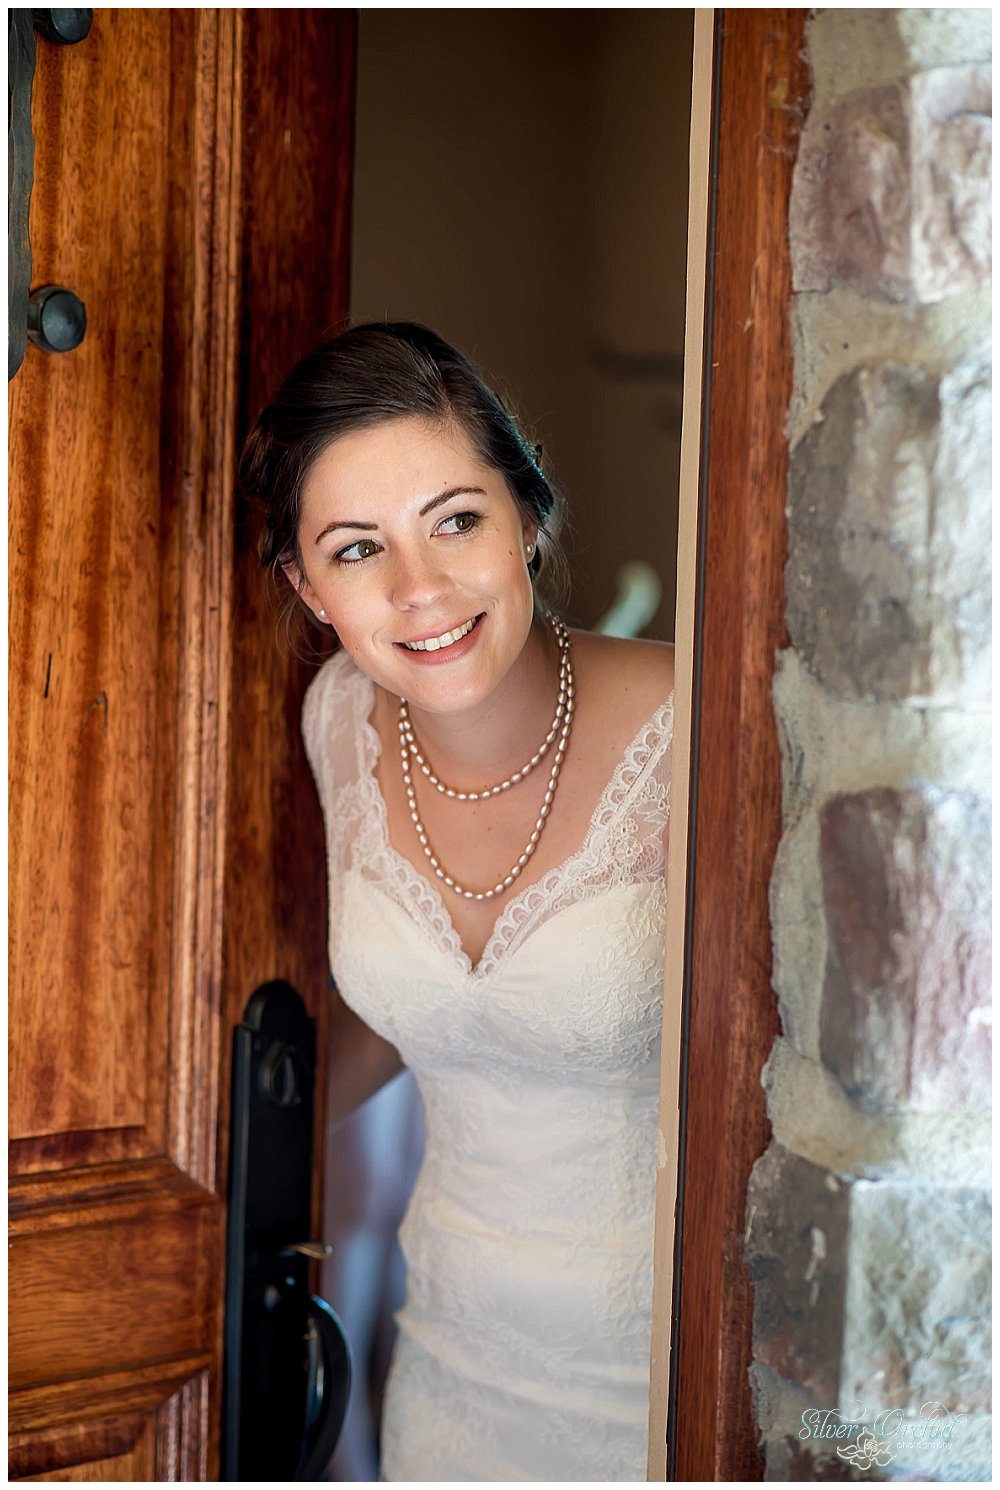 ©Silver Orchid Photography_wedding photography_FirstGlance_silverorchidphotography.com_0005.jpg